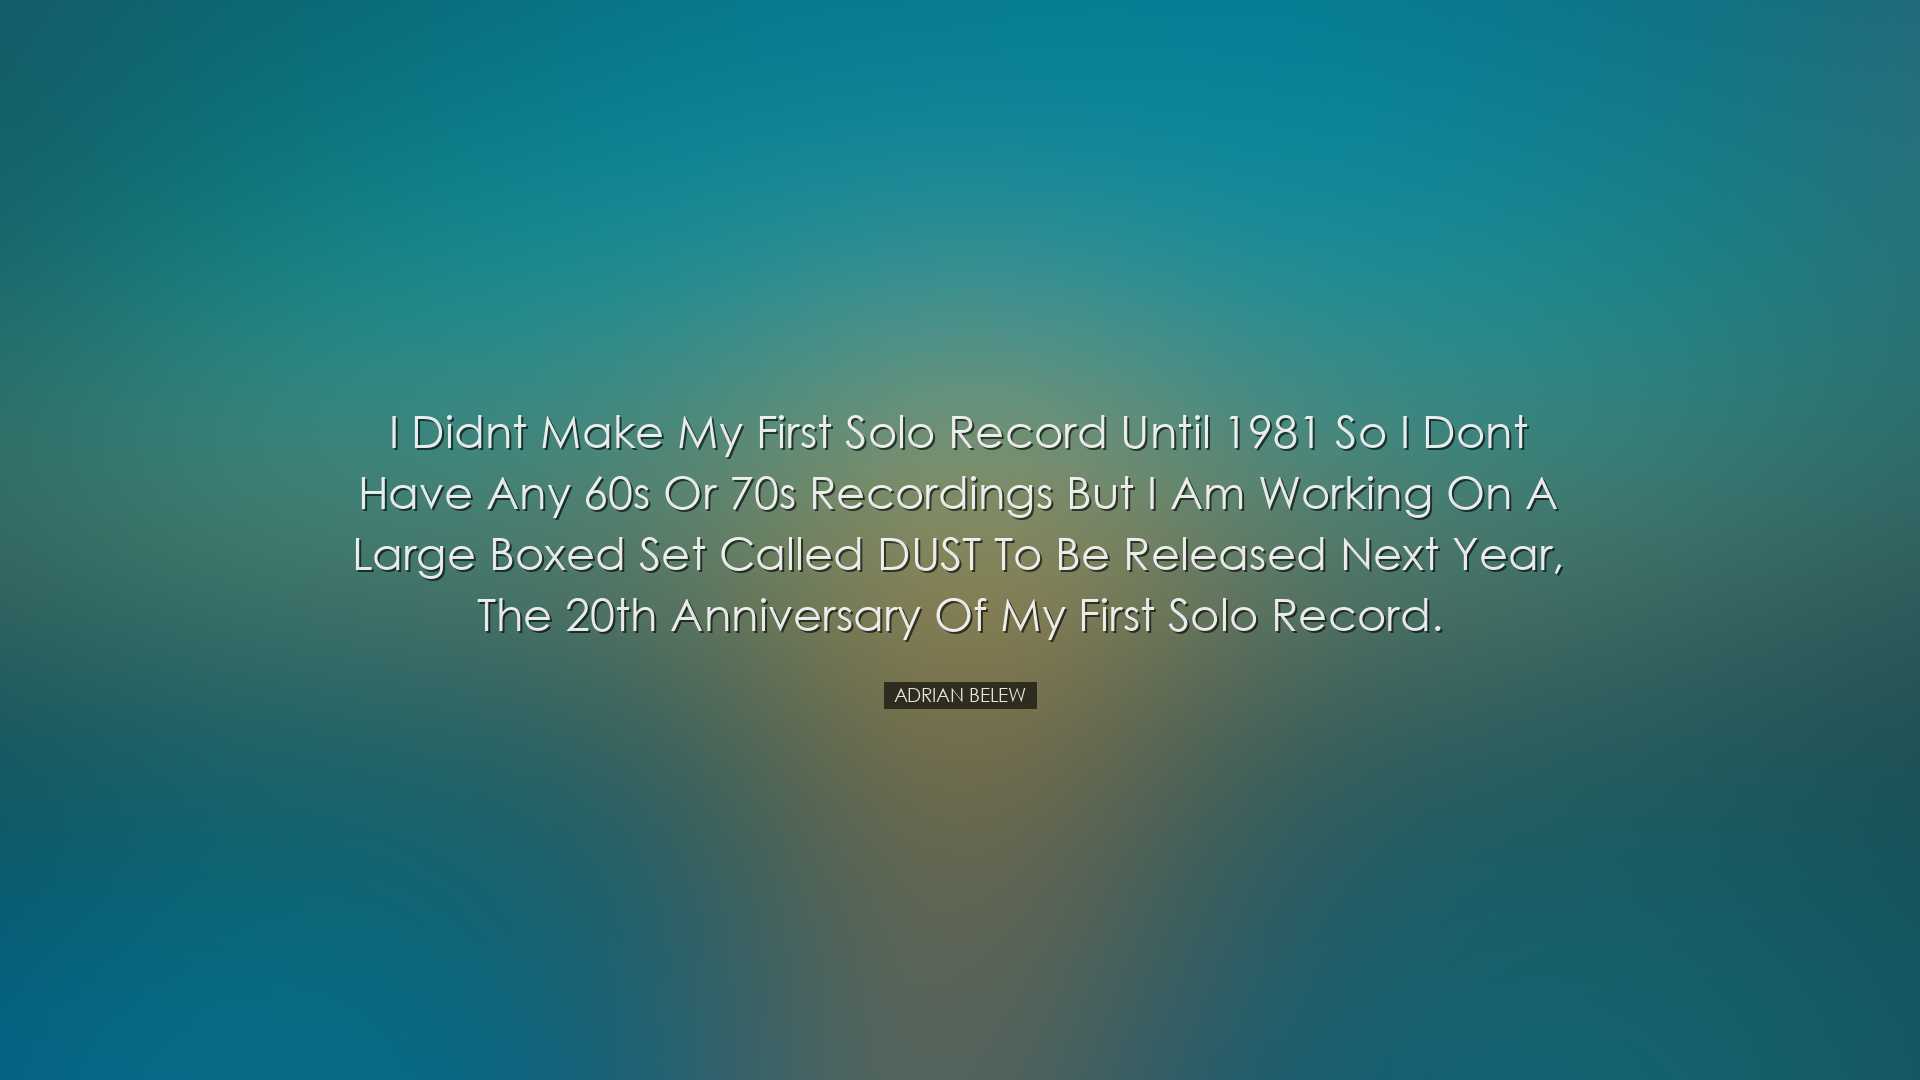 I didnt make my first solo record until 1981 so I dont have any 60